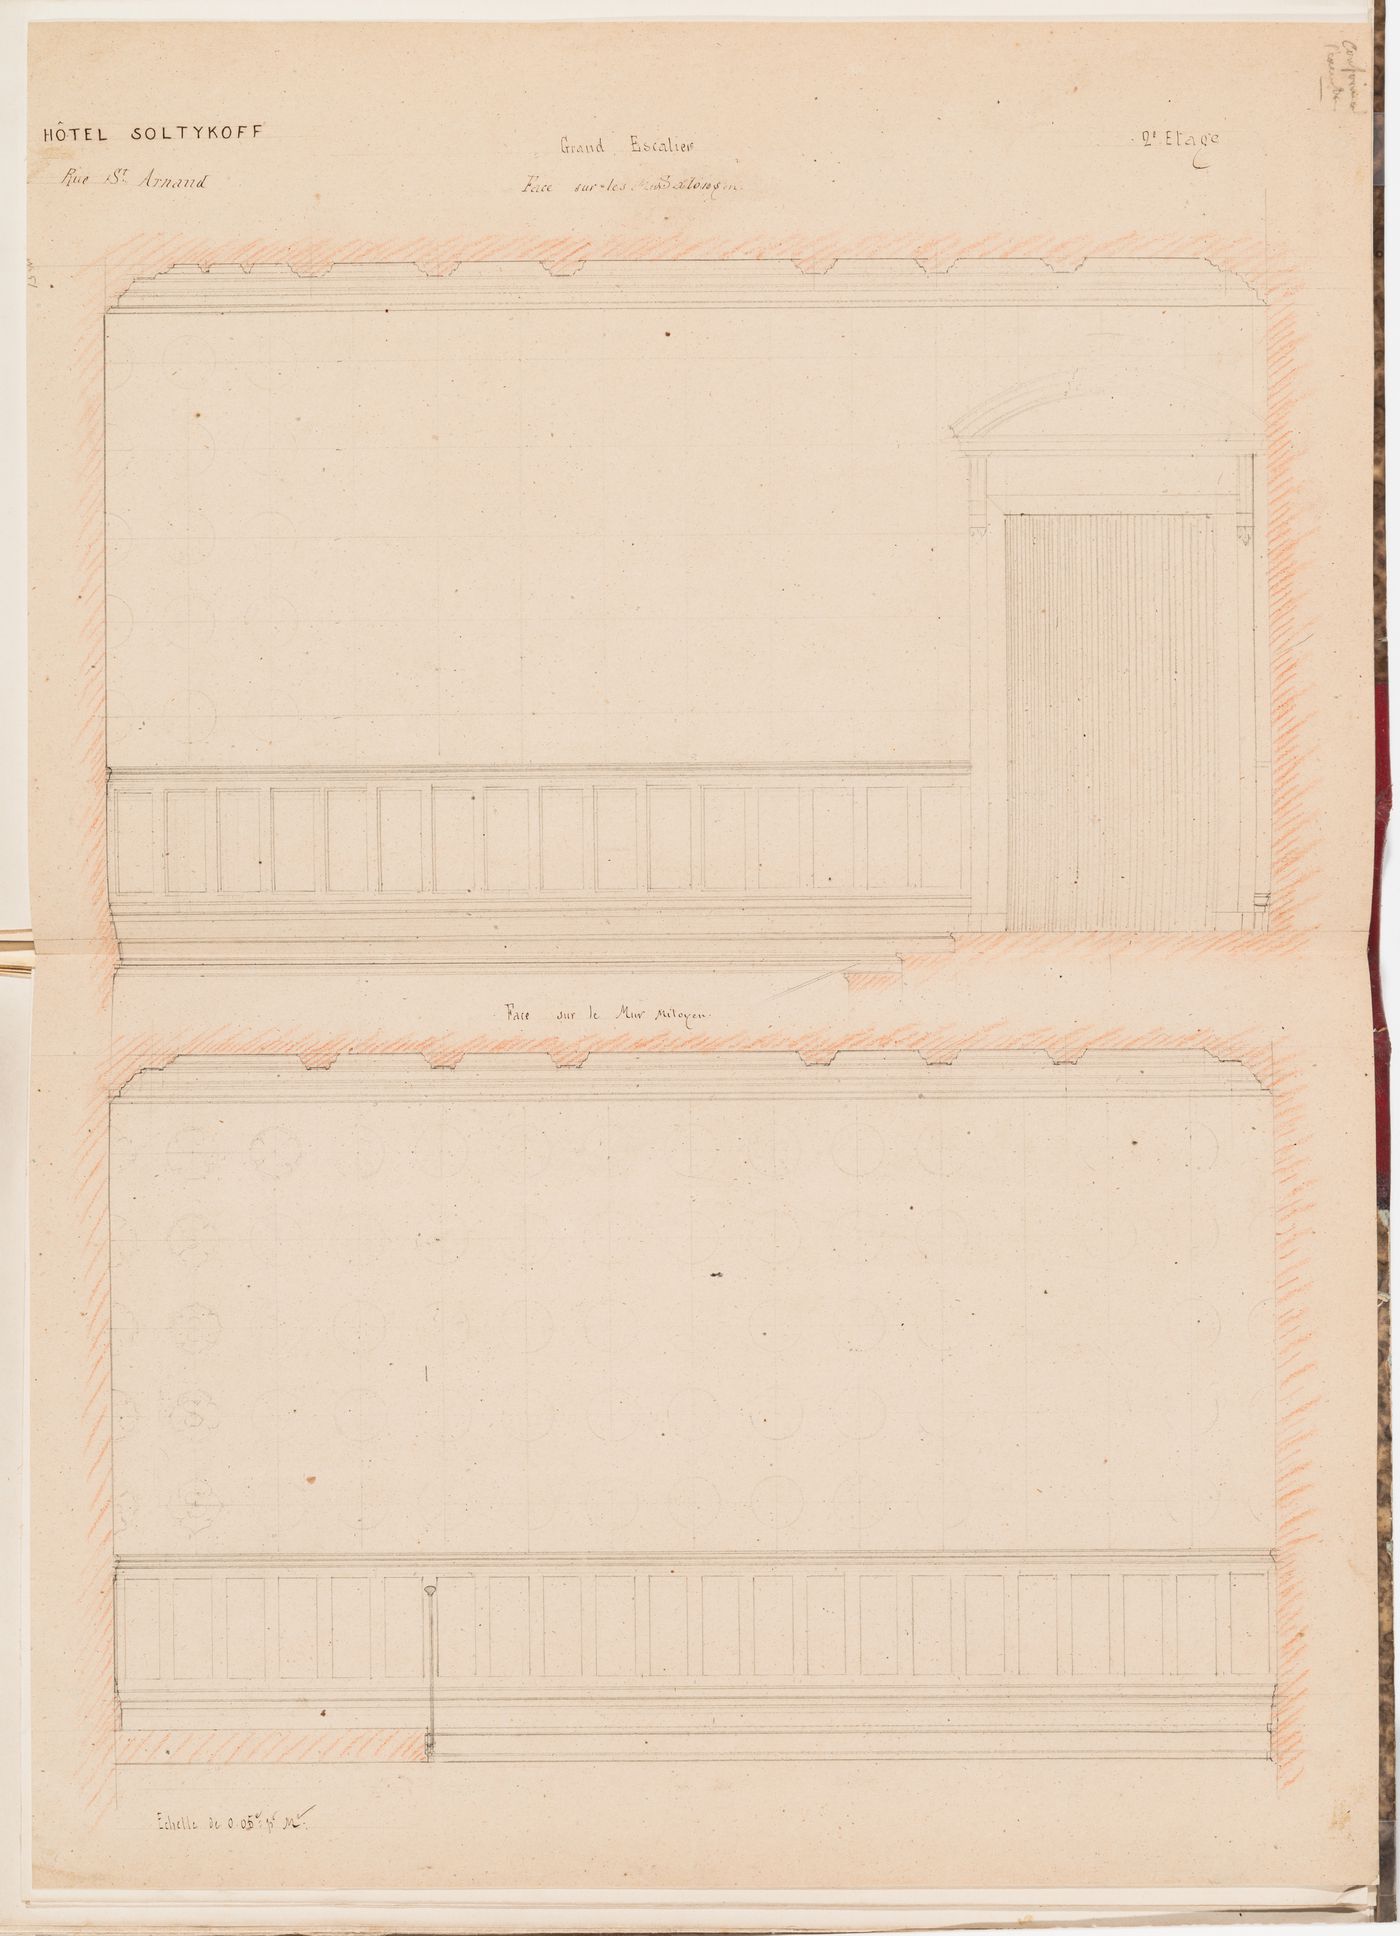 Second floor elevations for the grand staircase, Hôtel Soltykoff